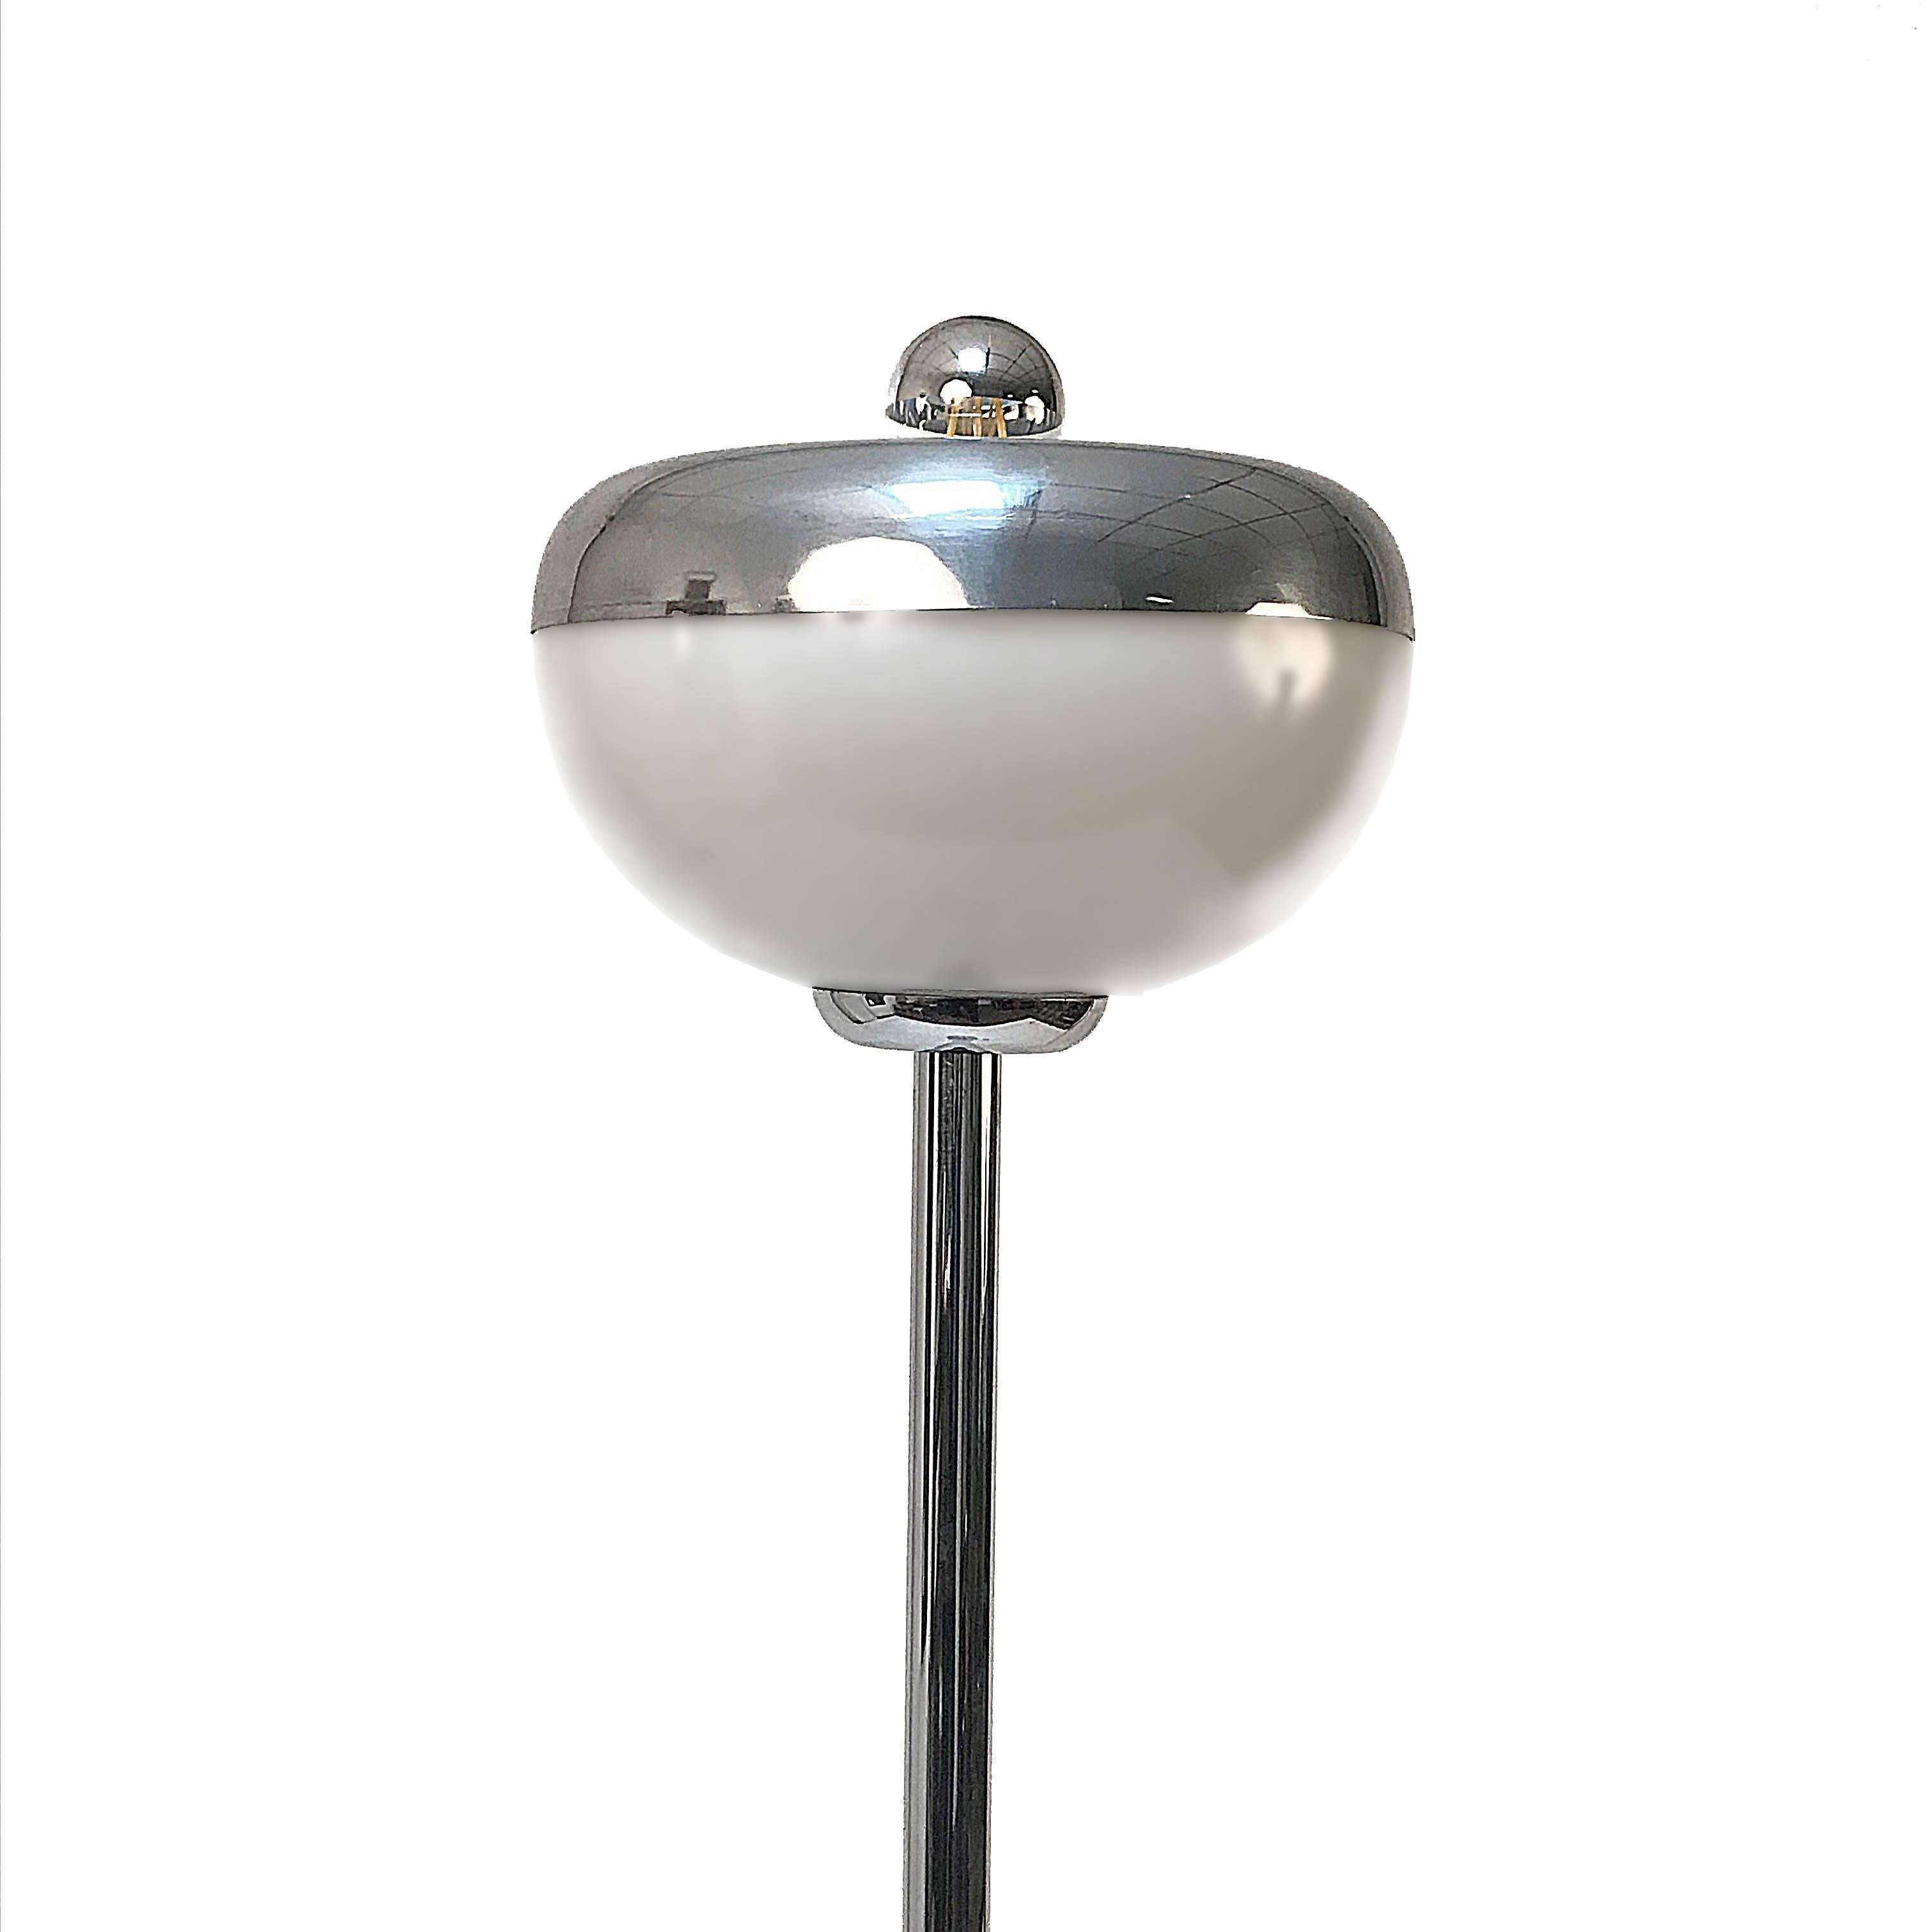 Double-start floor lamp in chromed metal, glass, and aluminium. 

It has a wonderful Carrara marble base produced in Italy during 70s. A piece where echoes of space-age design and materials (chromed metal and aluminium) meet the most classical of